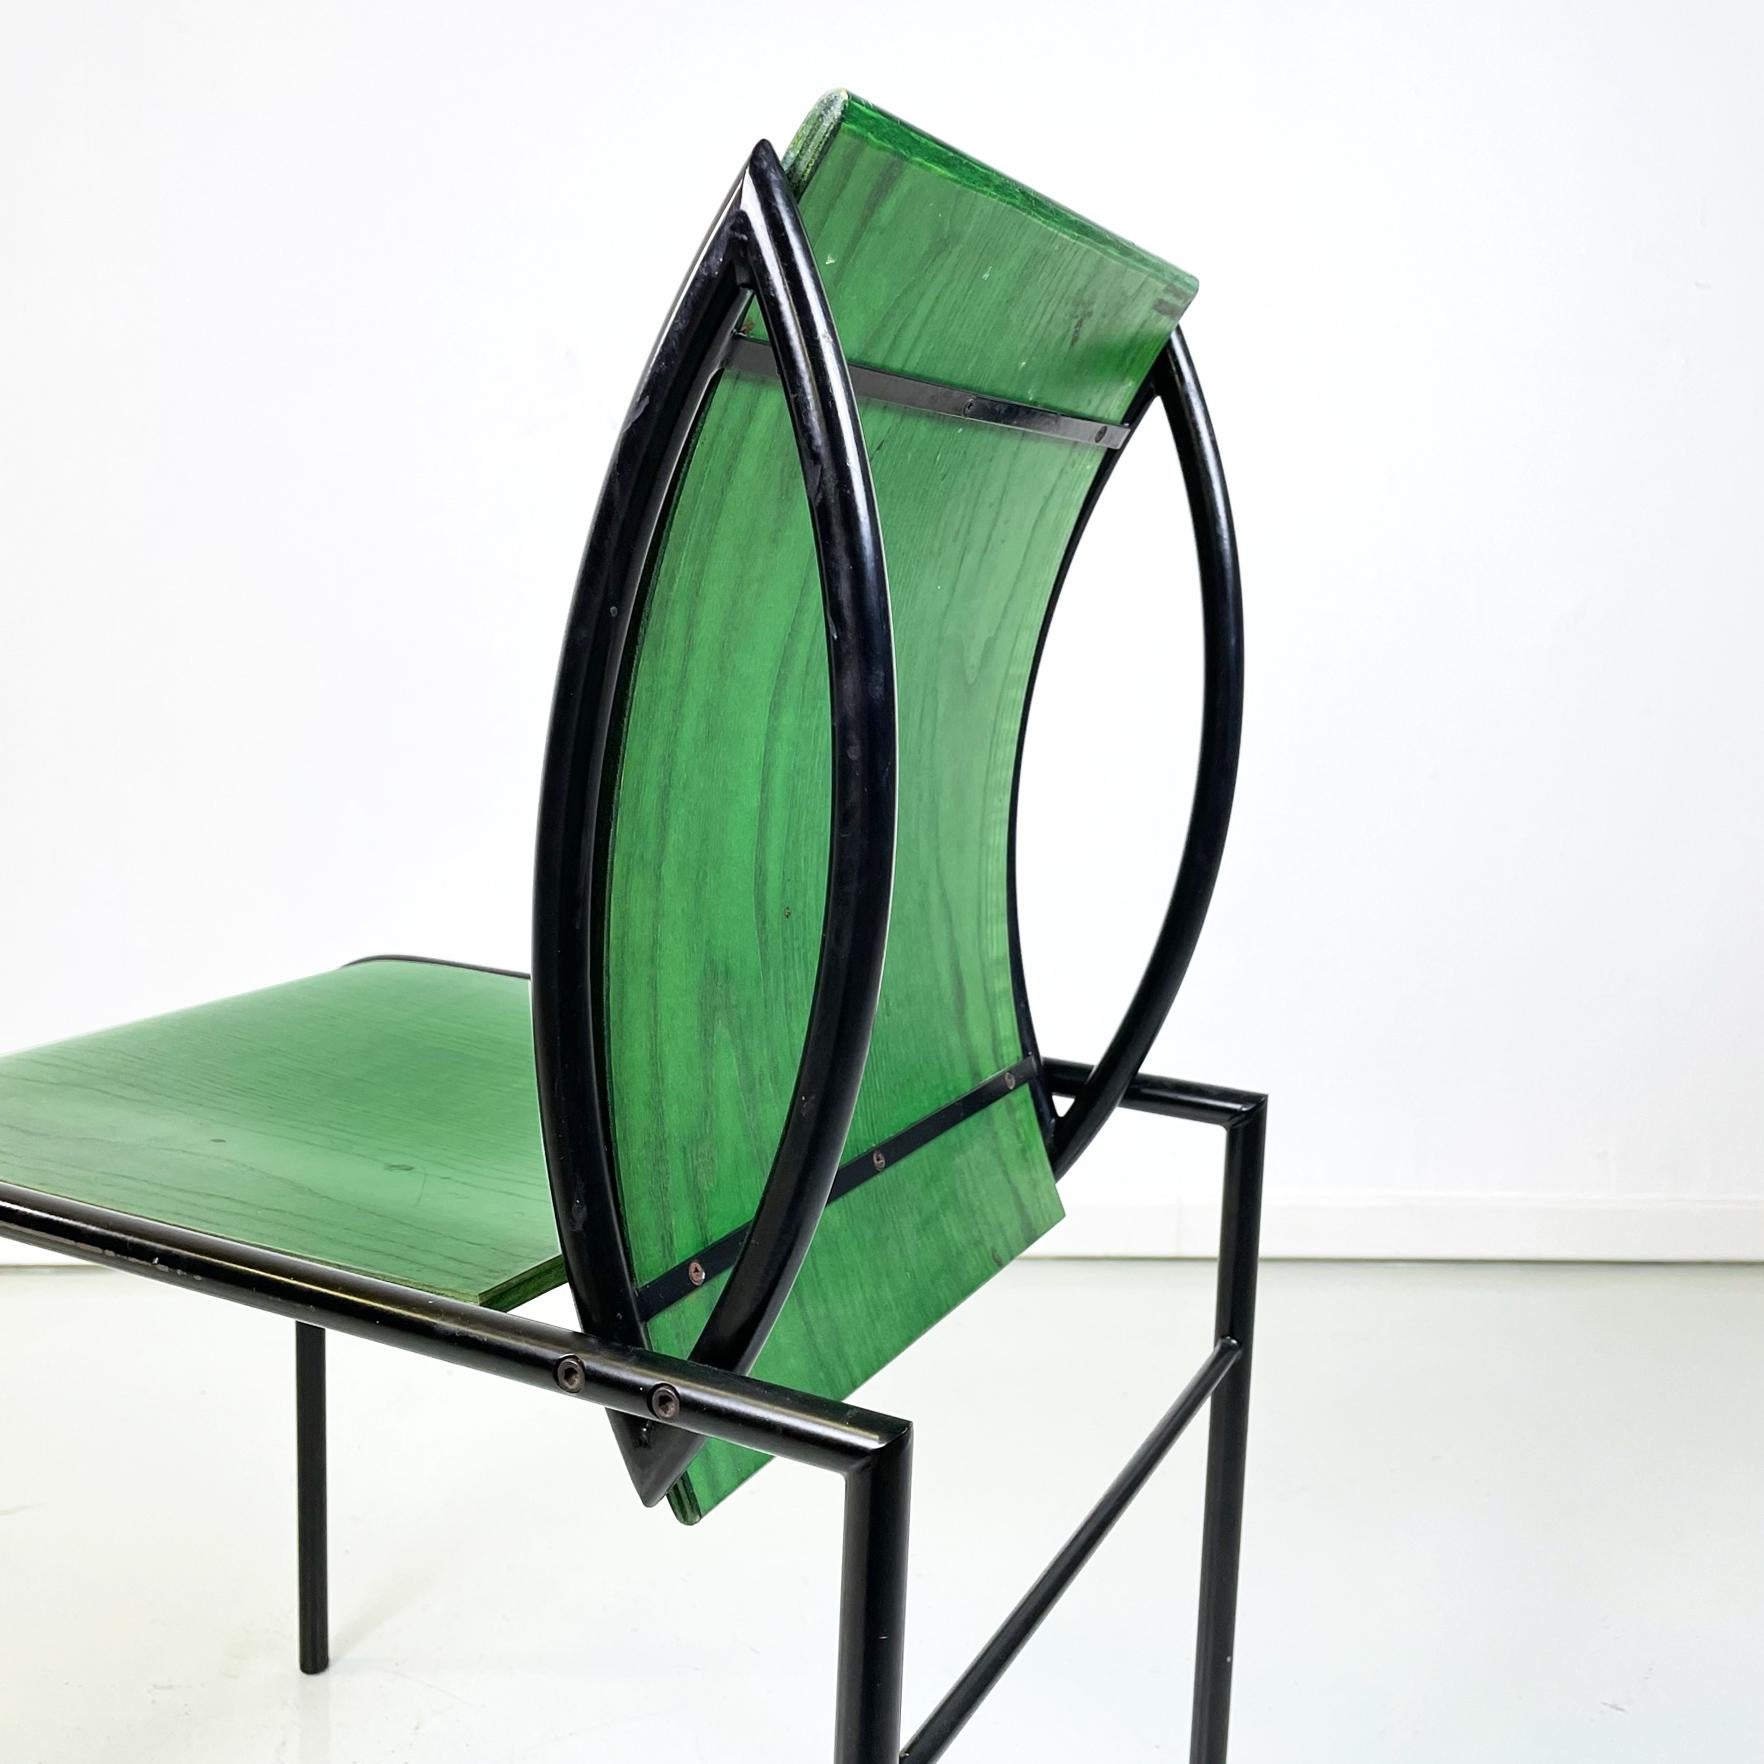 Italian modern Green wood black metal chair Kim by De Lucchi for Memphis, 1980s For Sale 6